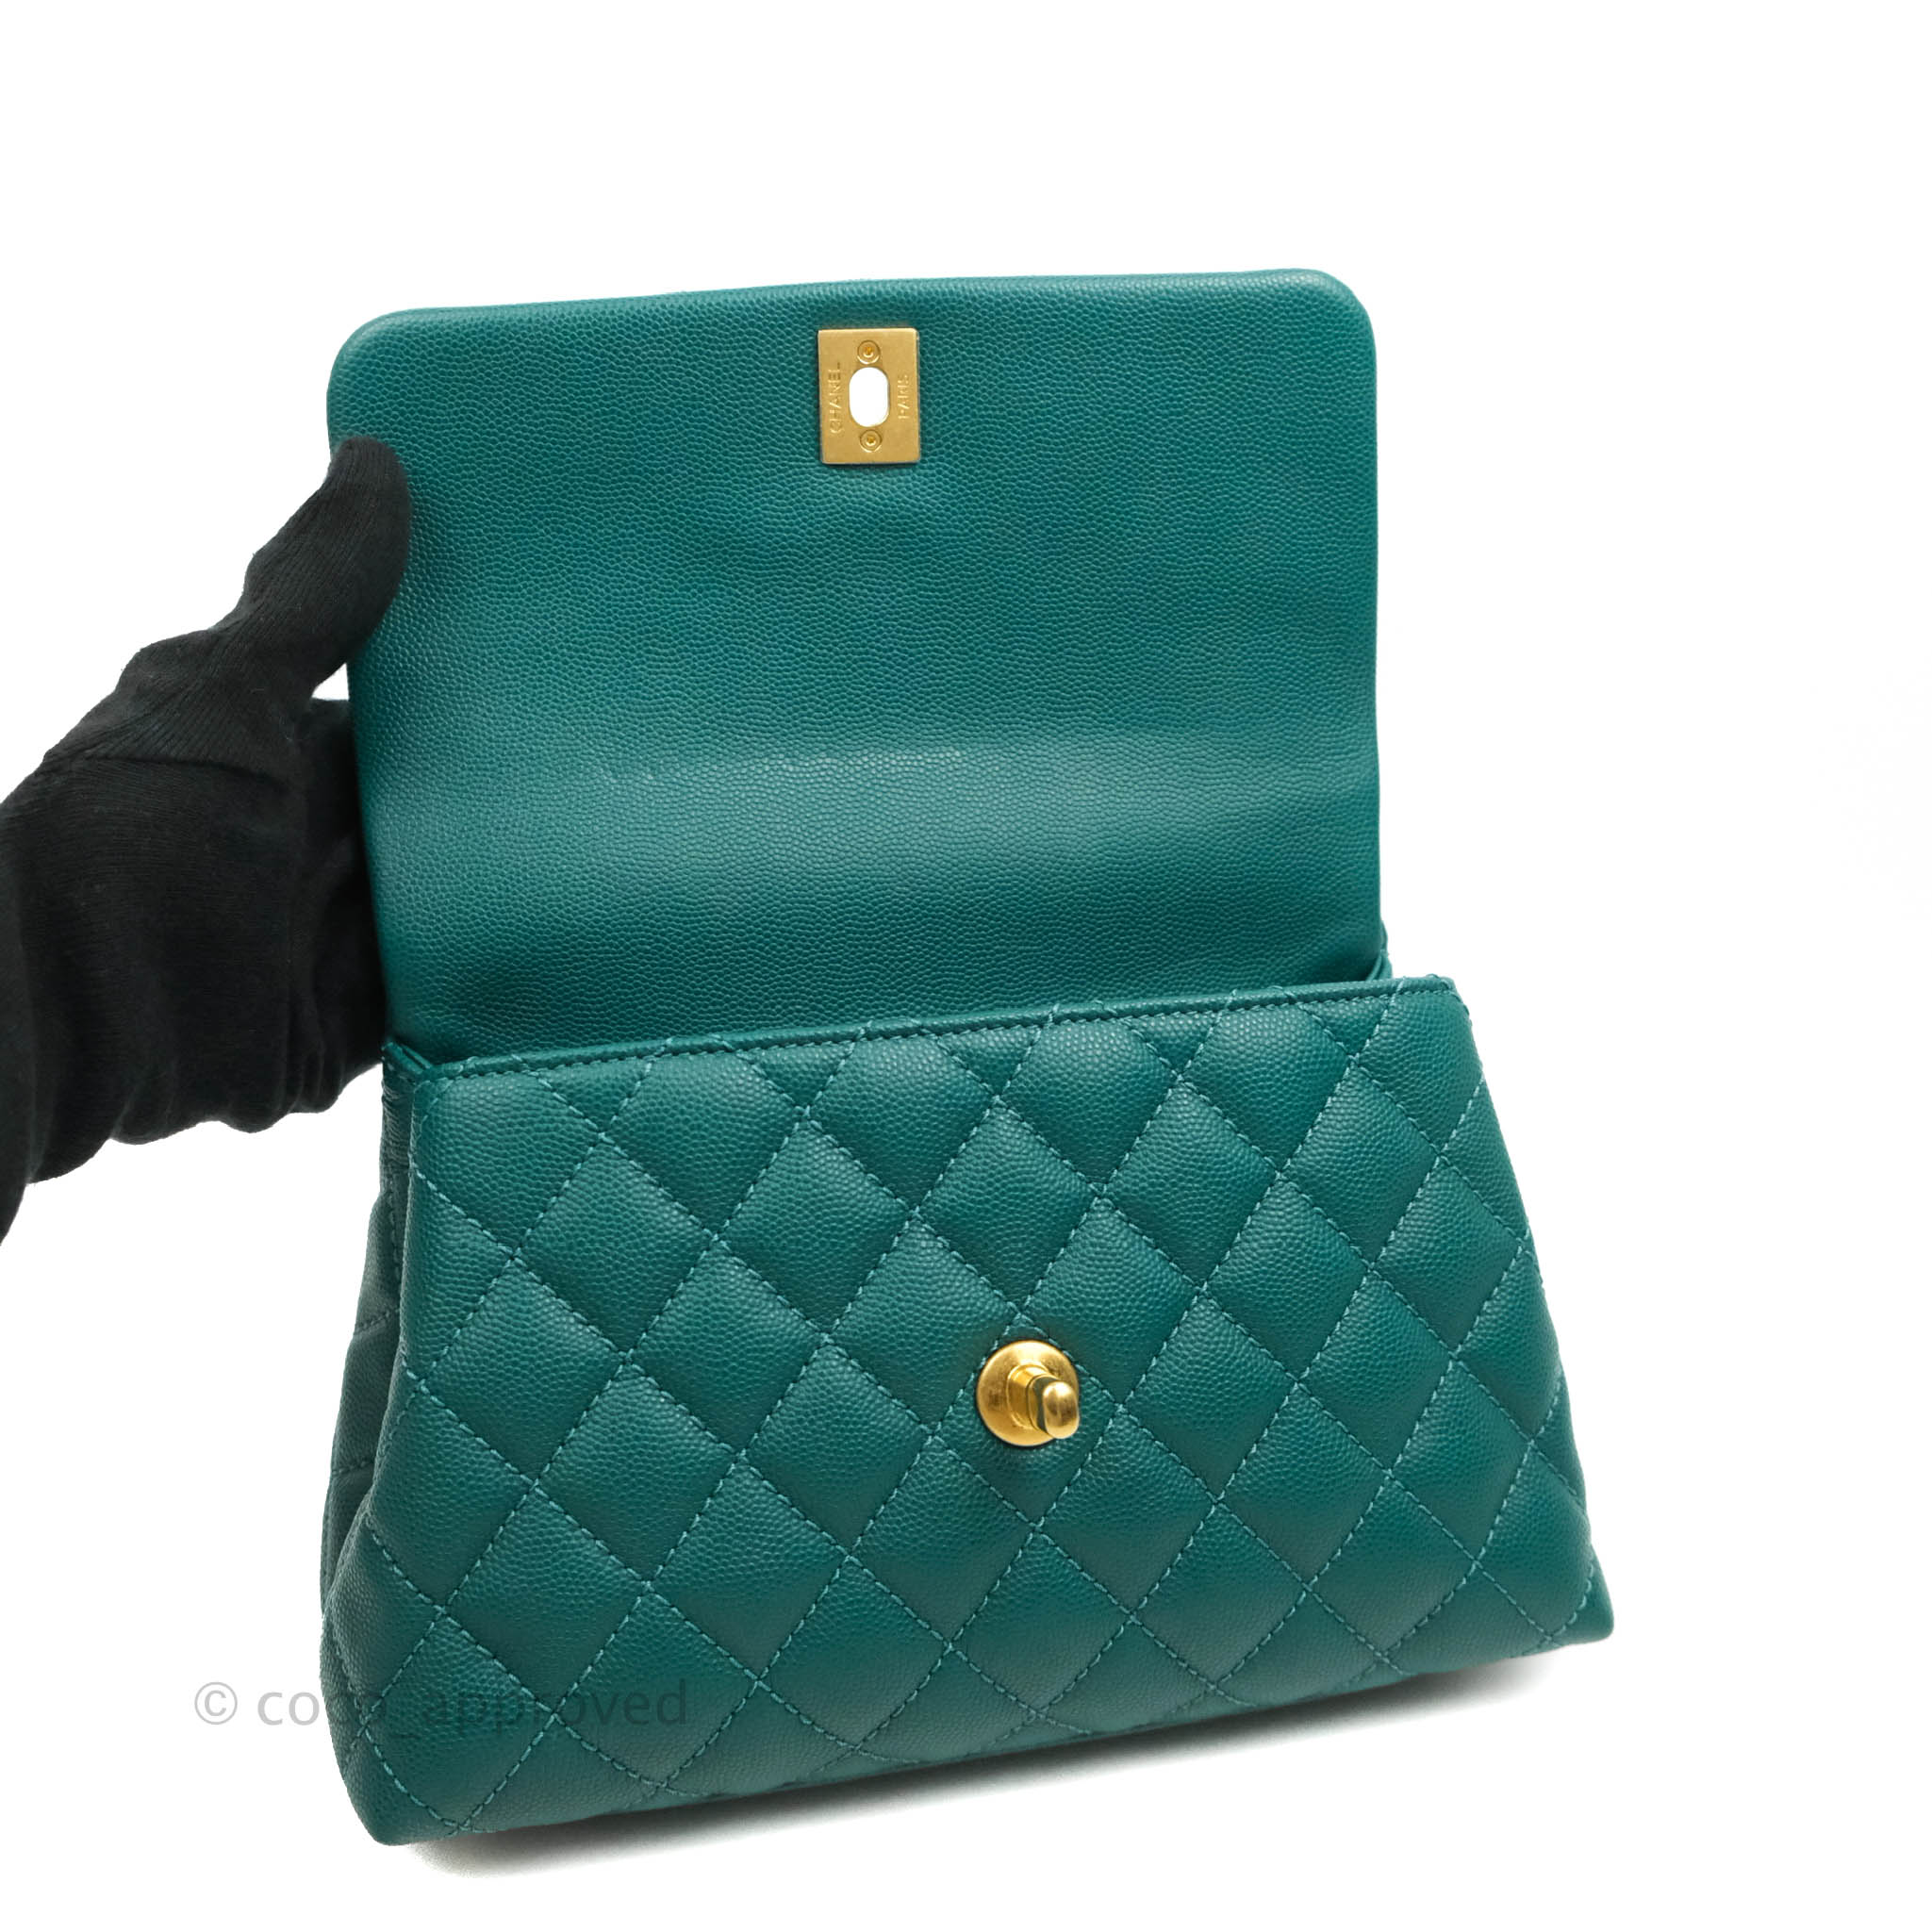 NEW Chanel Green Coco Handle Caviar Mini Flap Quilted Satchel Crossbody Bag